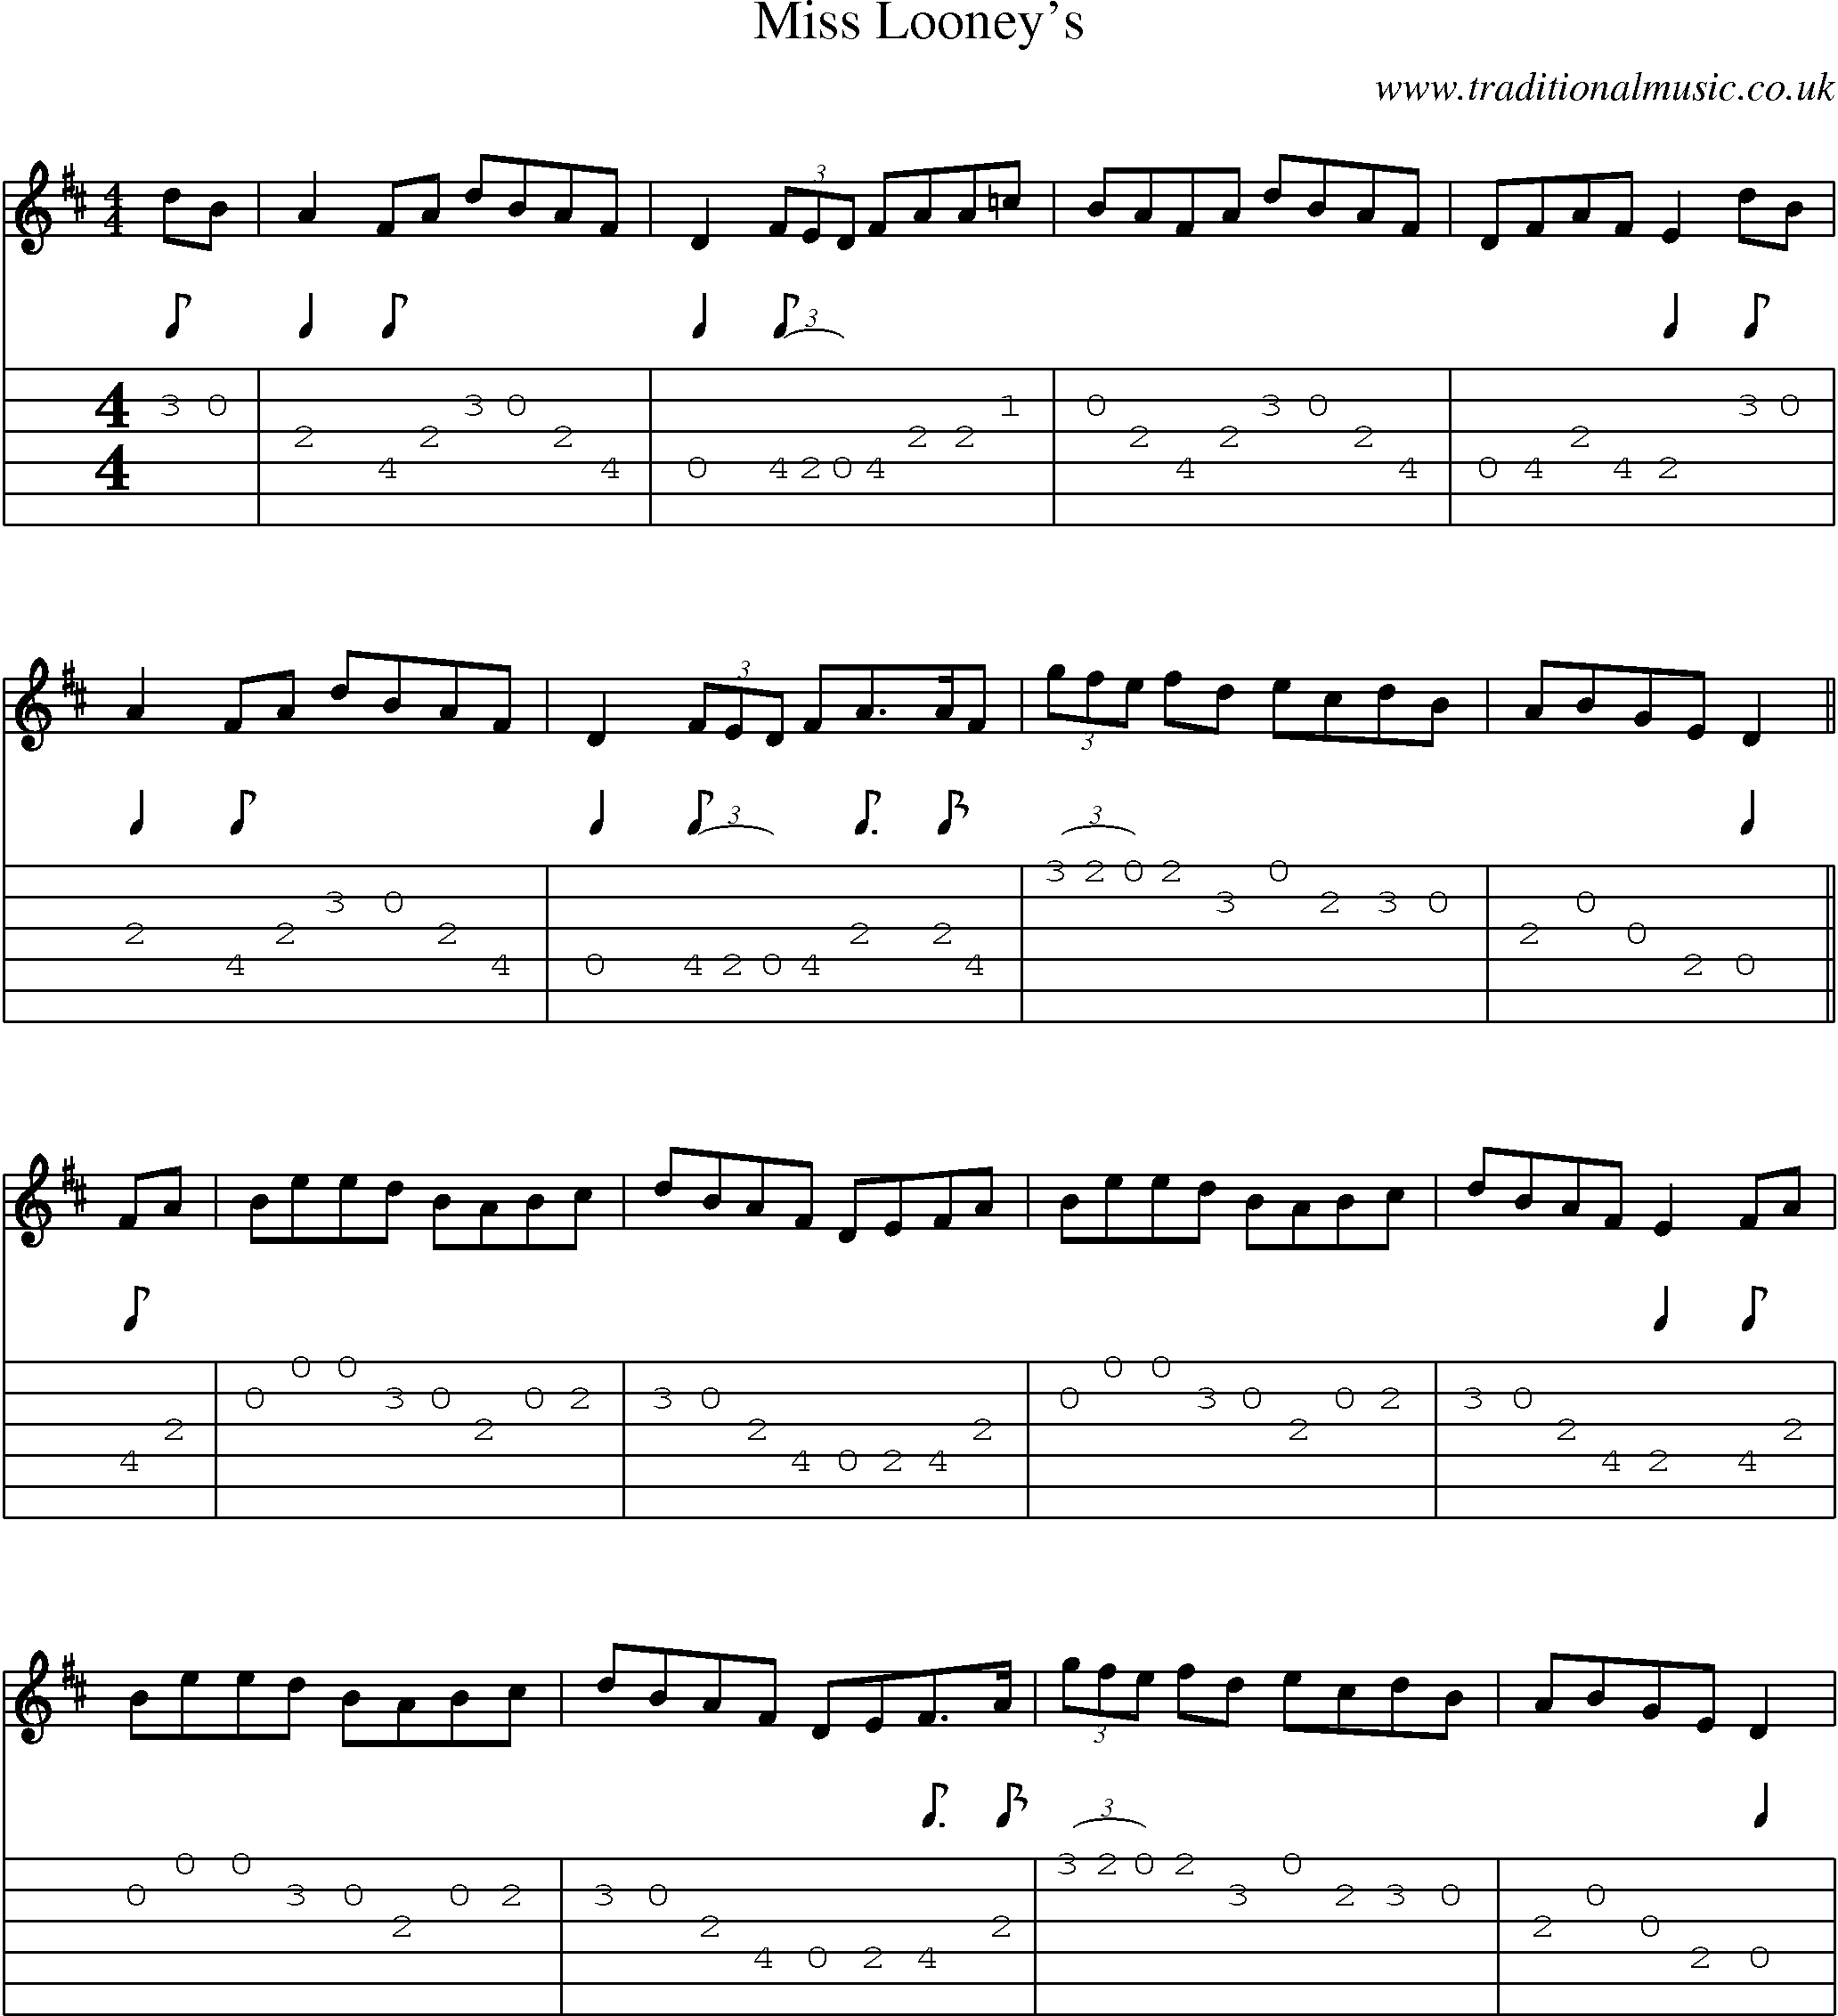 Music Score and Guitar Tabs for Miss Looneys